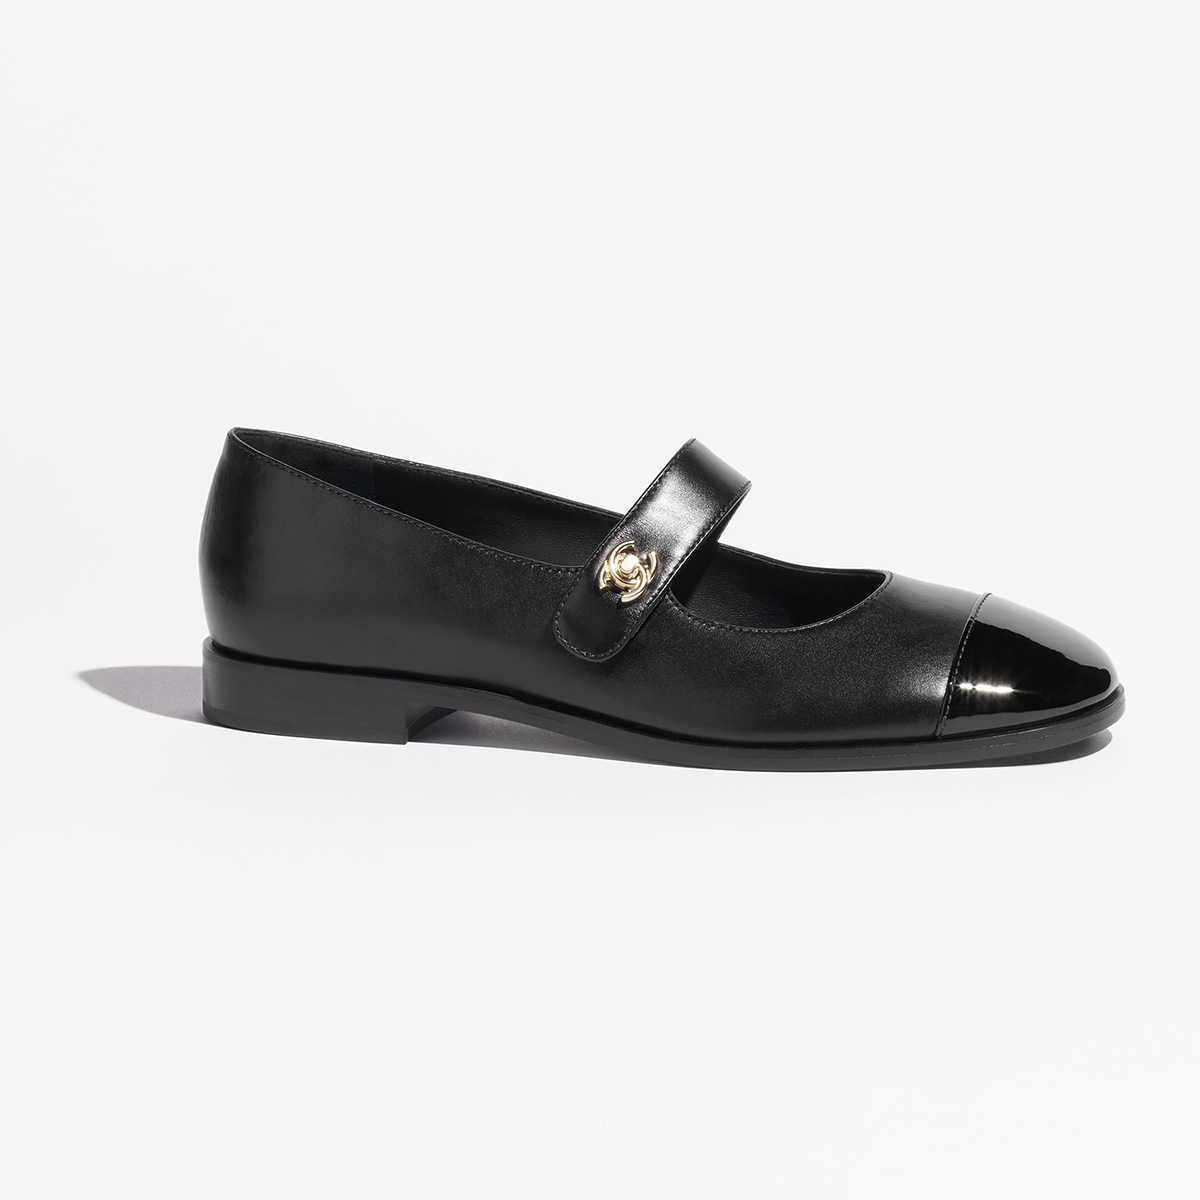 Chanel patent leather mary jane flats